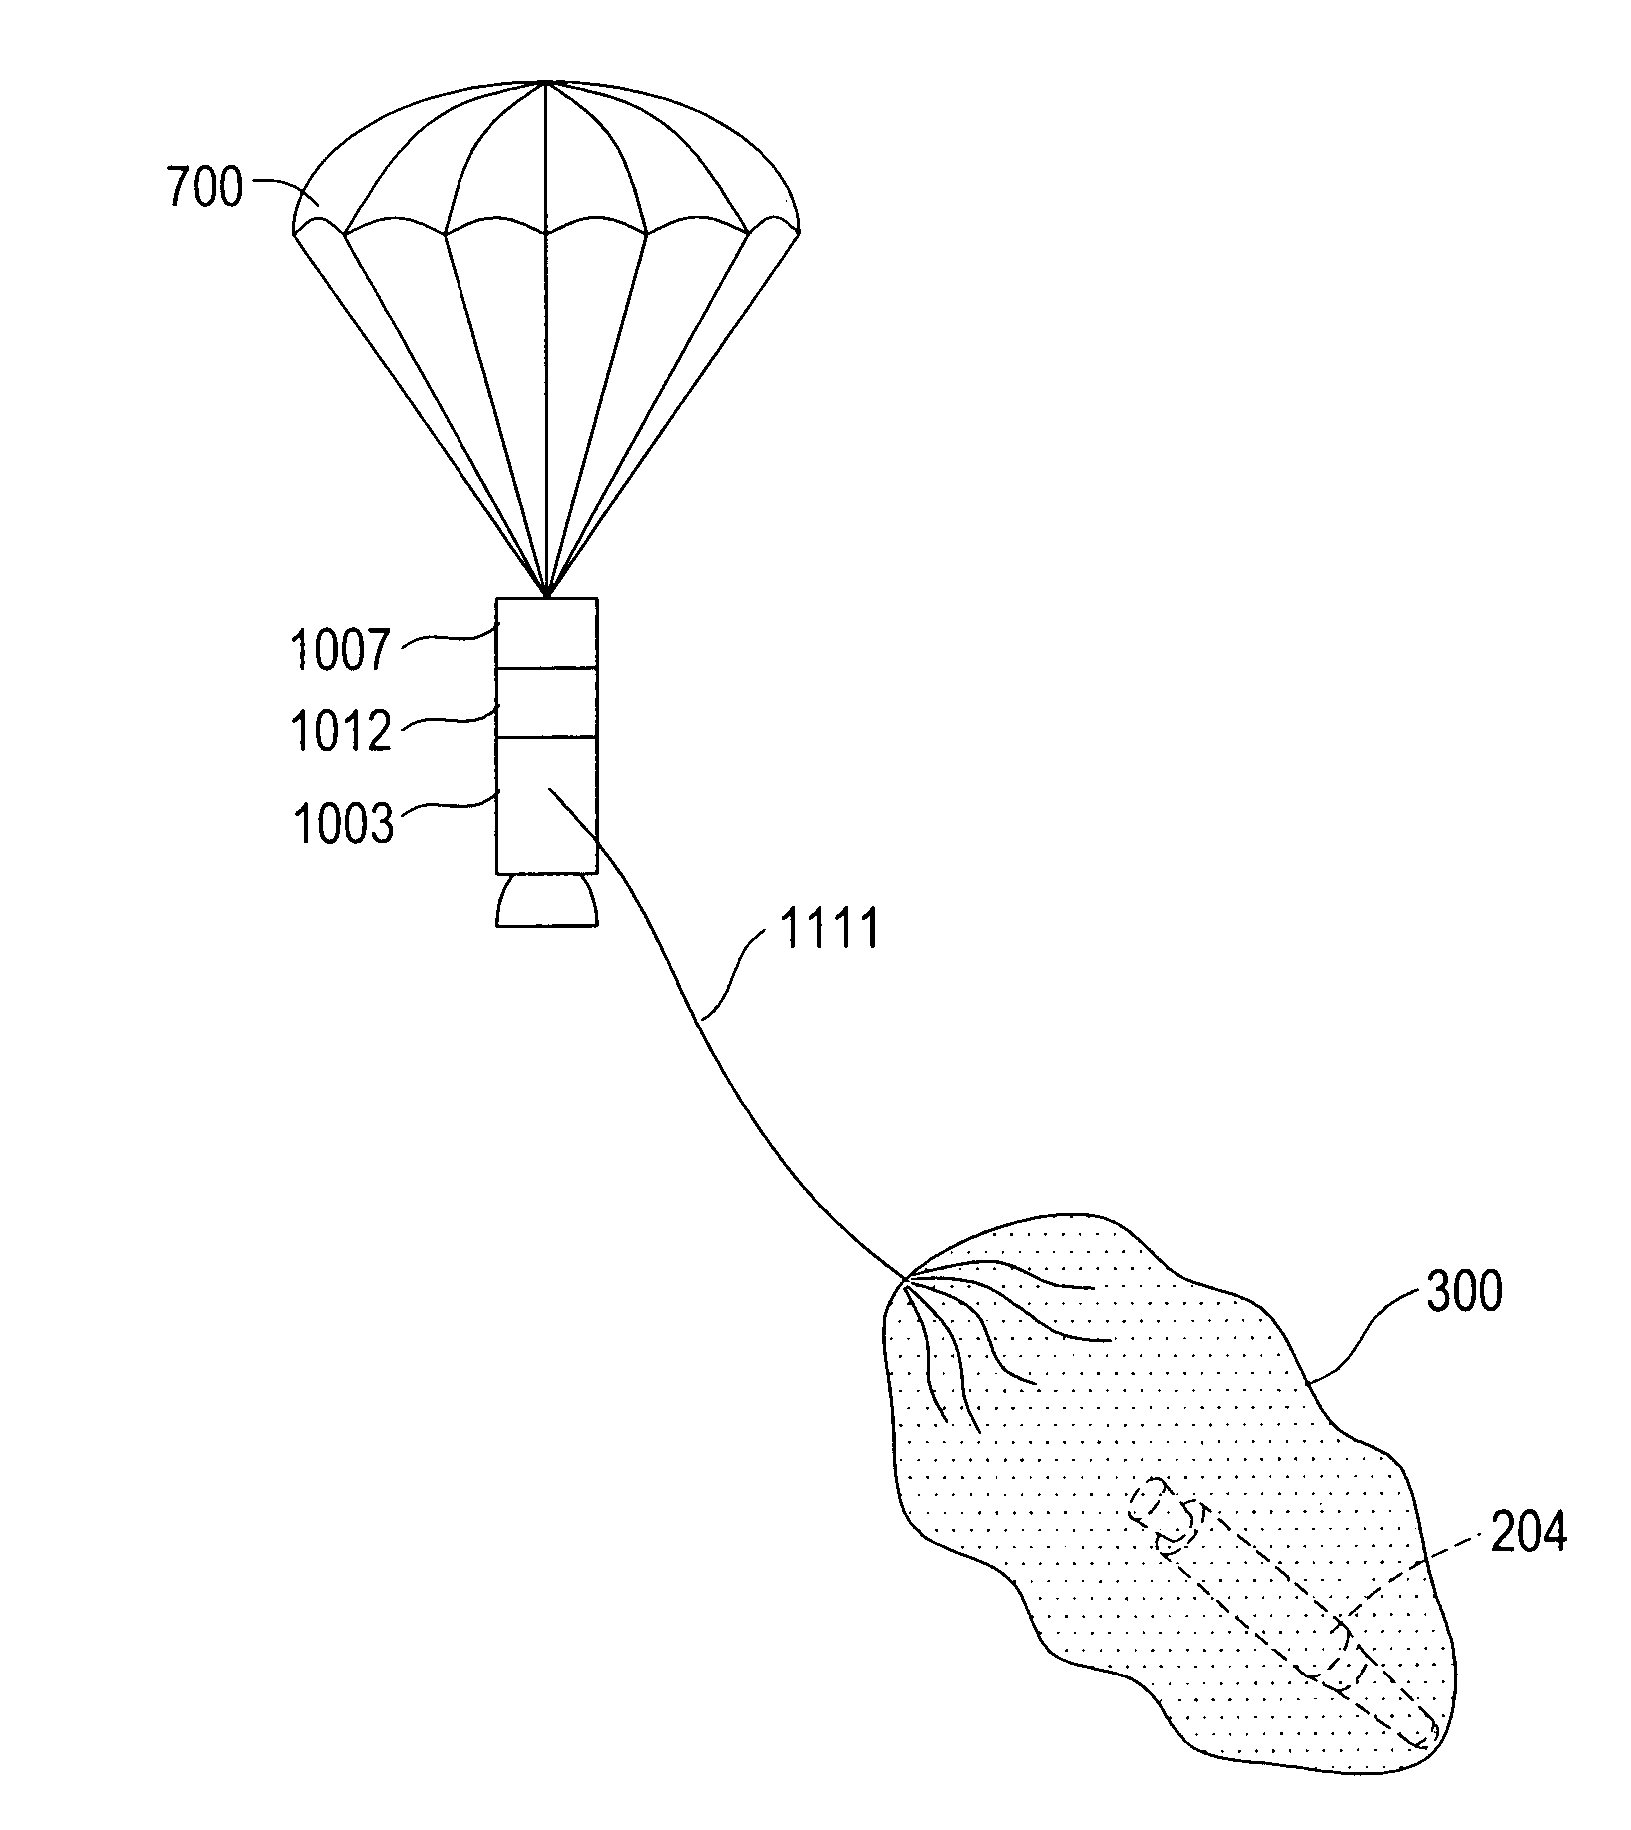 System and method for intercepting a projectile